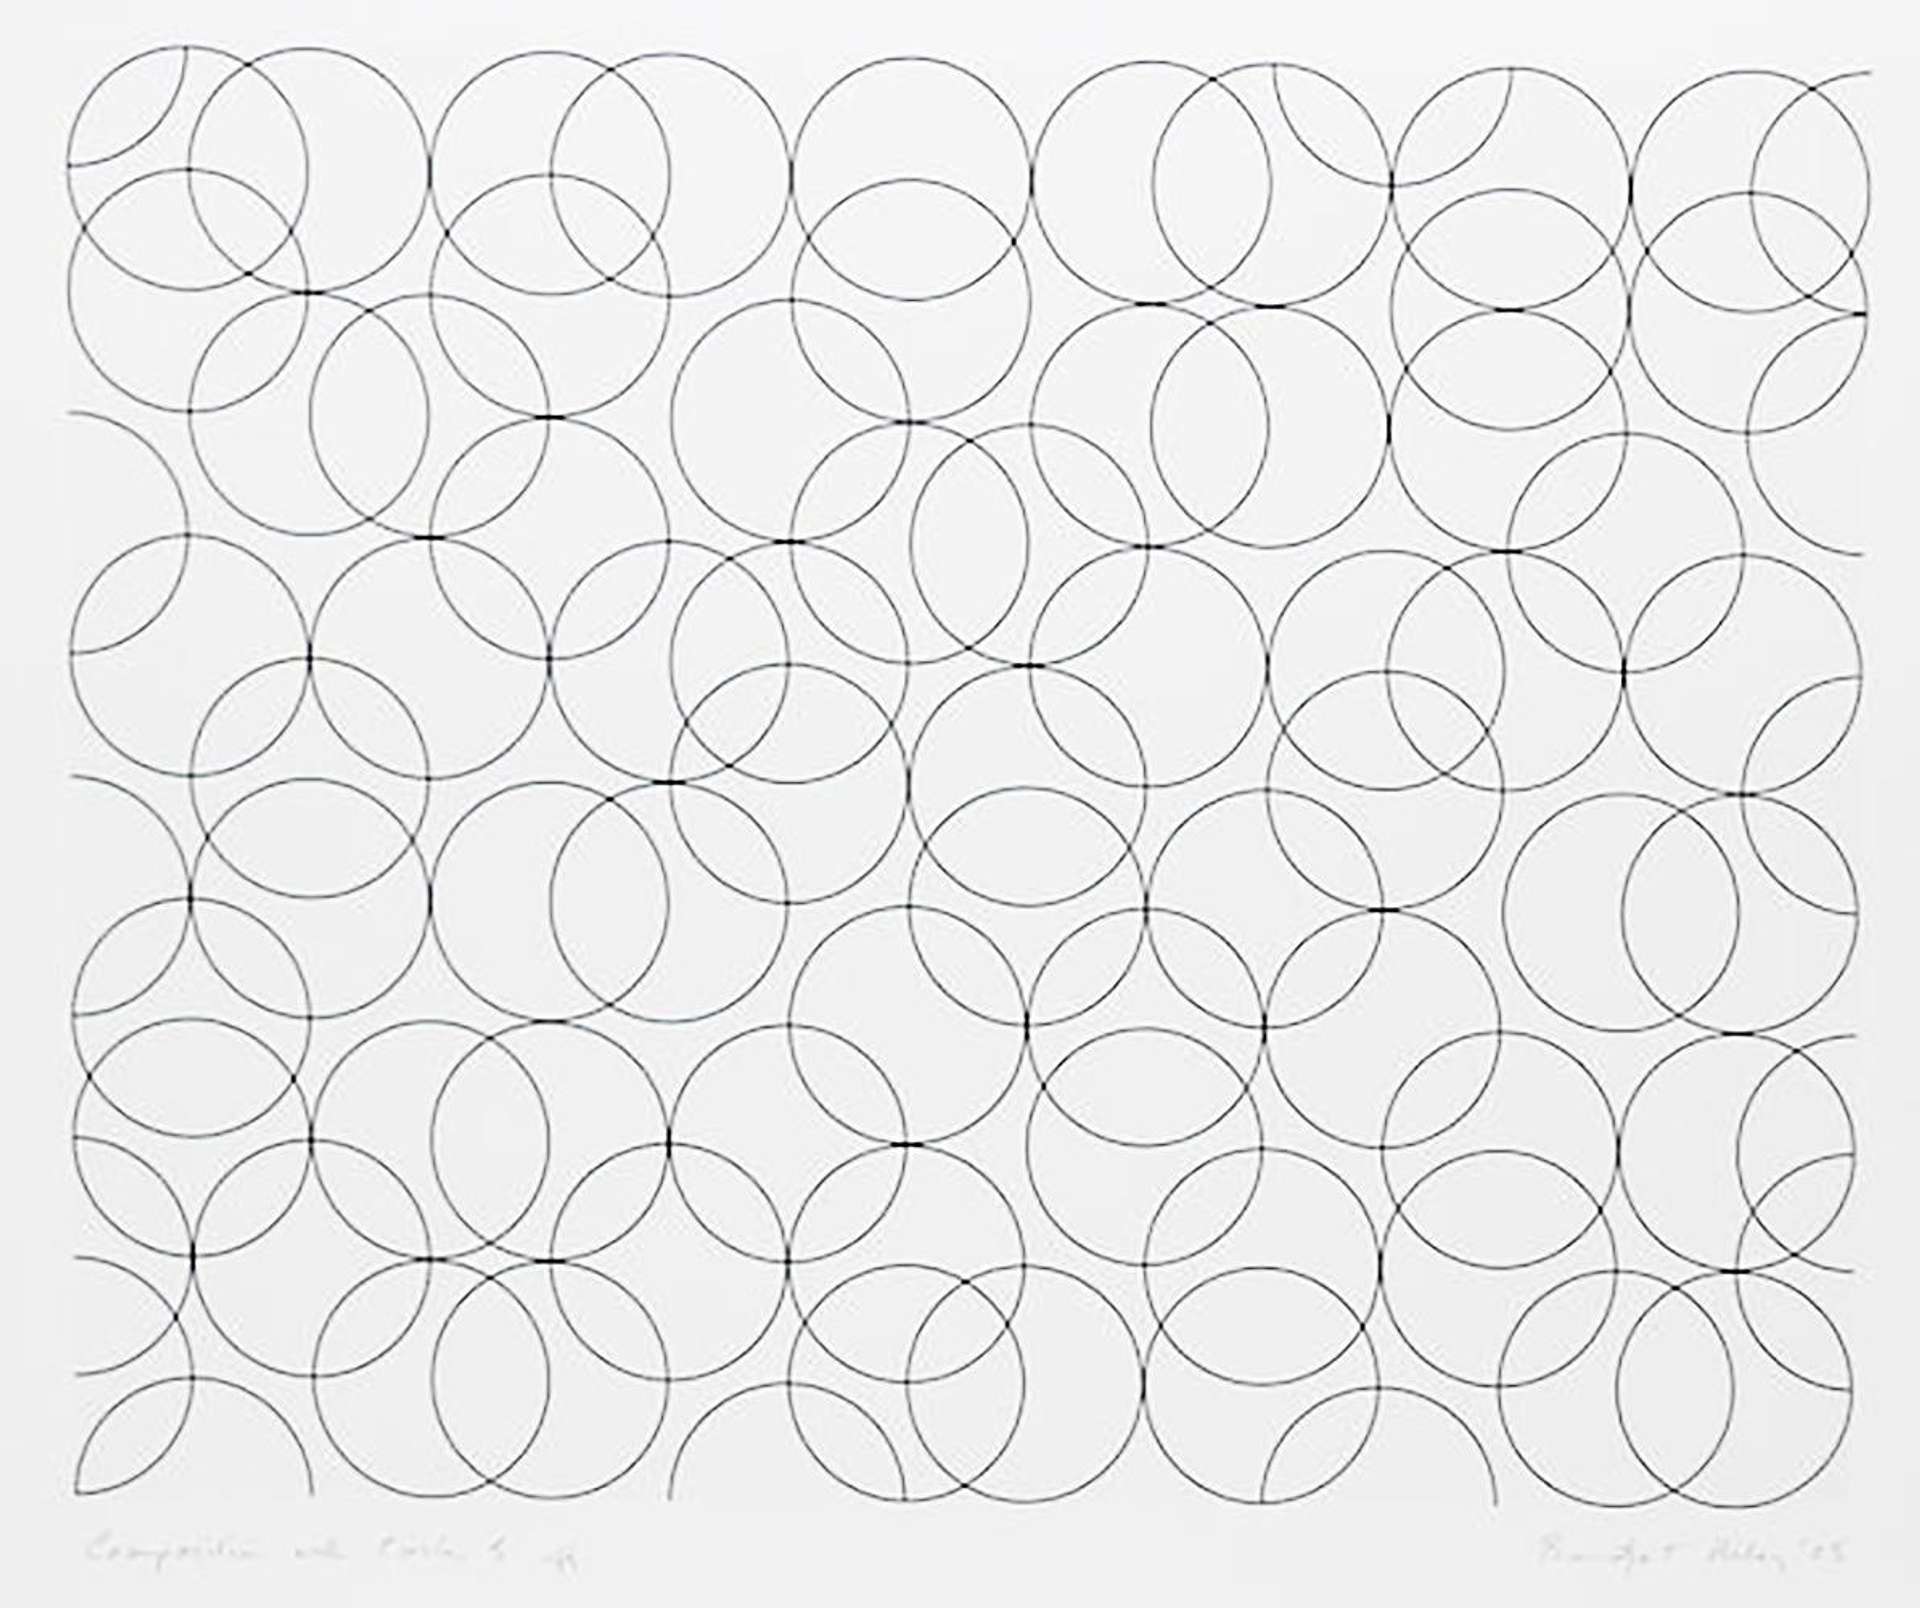 A series of overlapping black circles on a white background, done by artist Bridget Riley